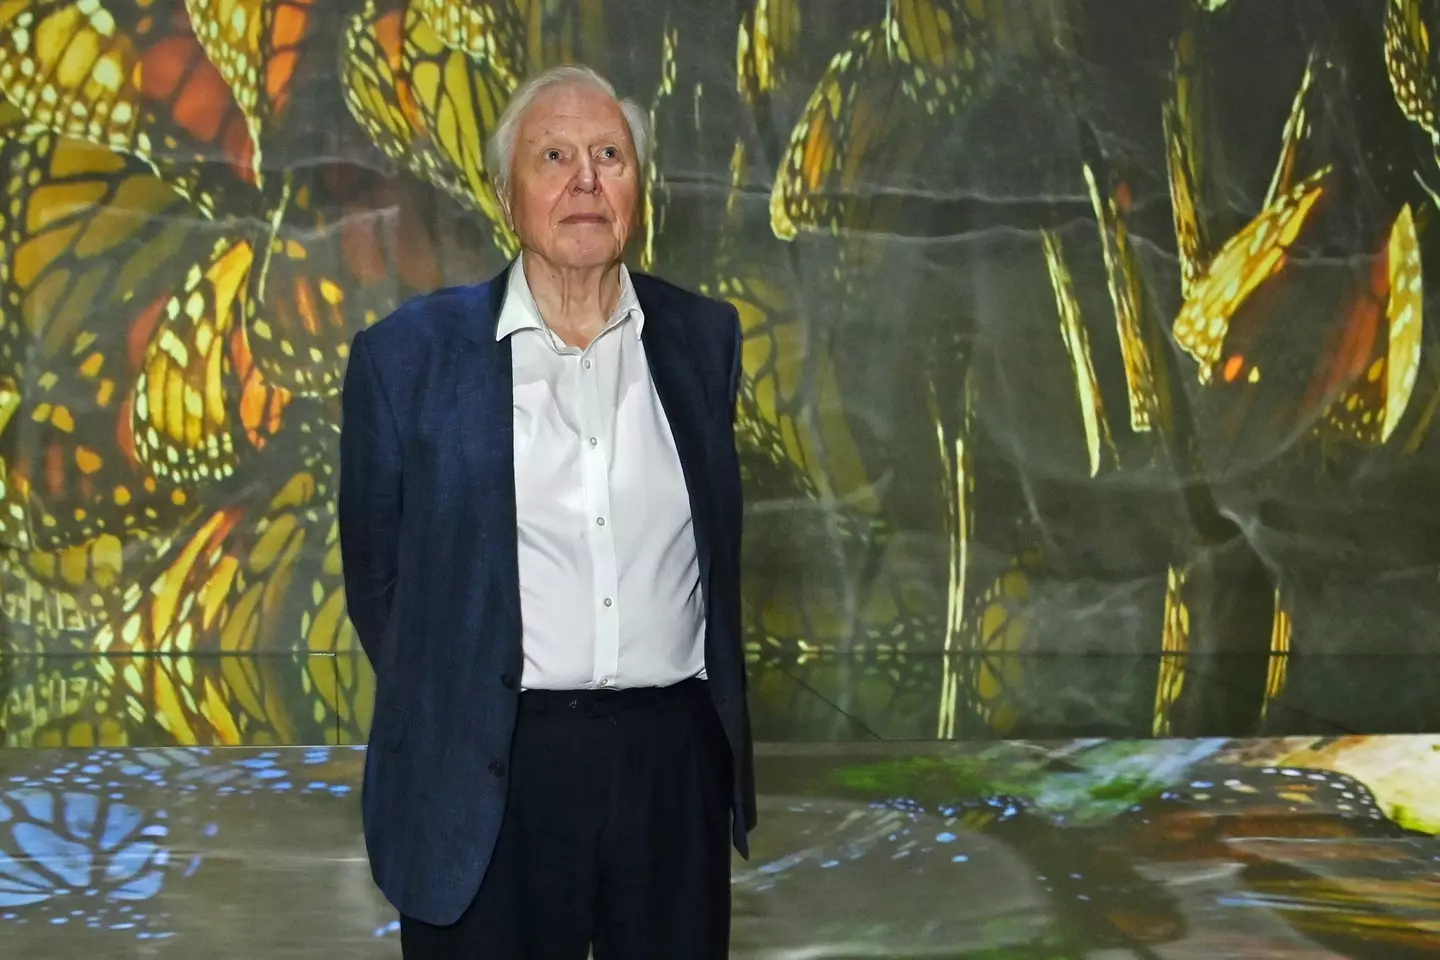 Sir David Attenborough at the launch of Planet Earth III. (Dave Benett/Getty Images)